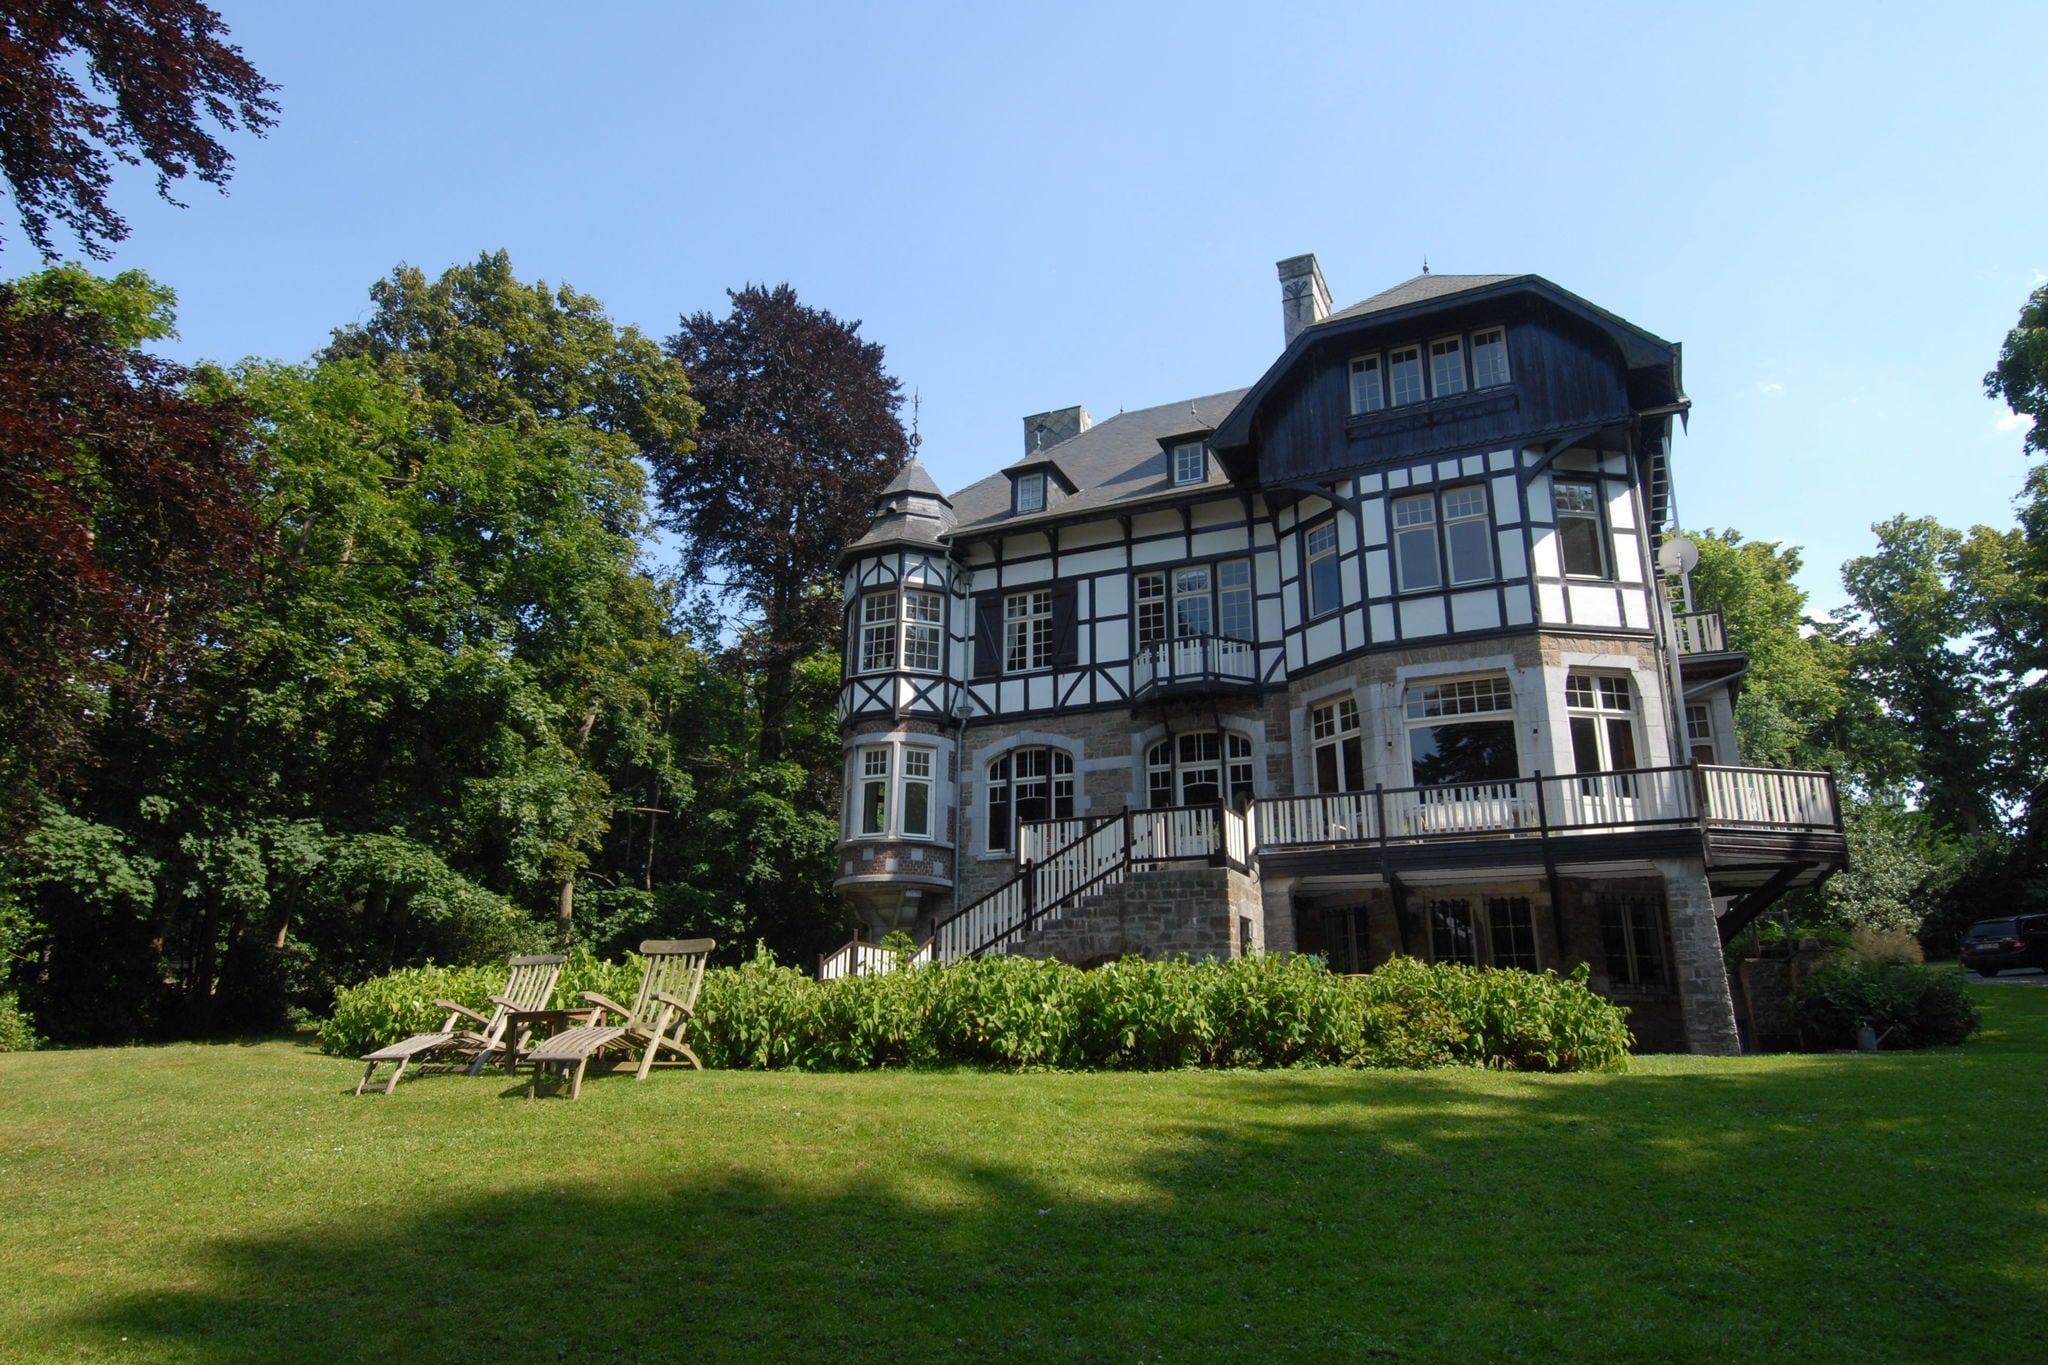 Beautiful castle house in Spa, authenticly decorated and with spacious garden